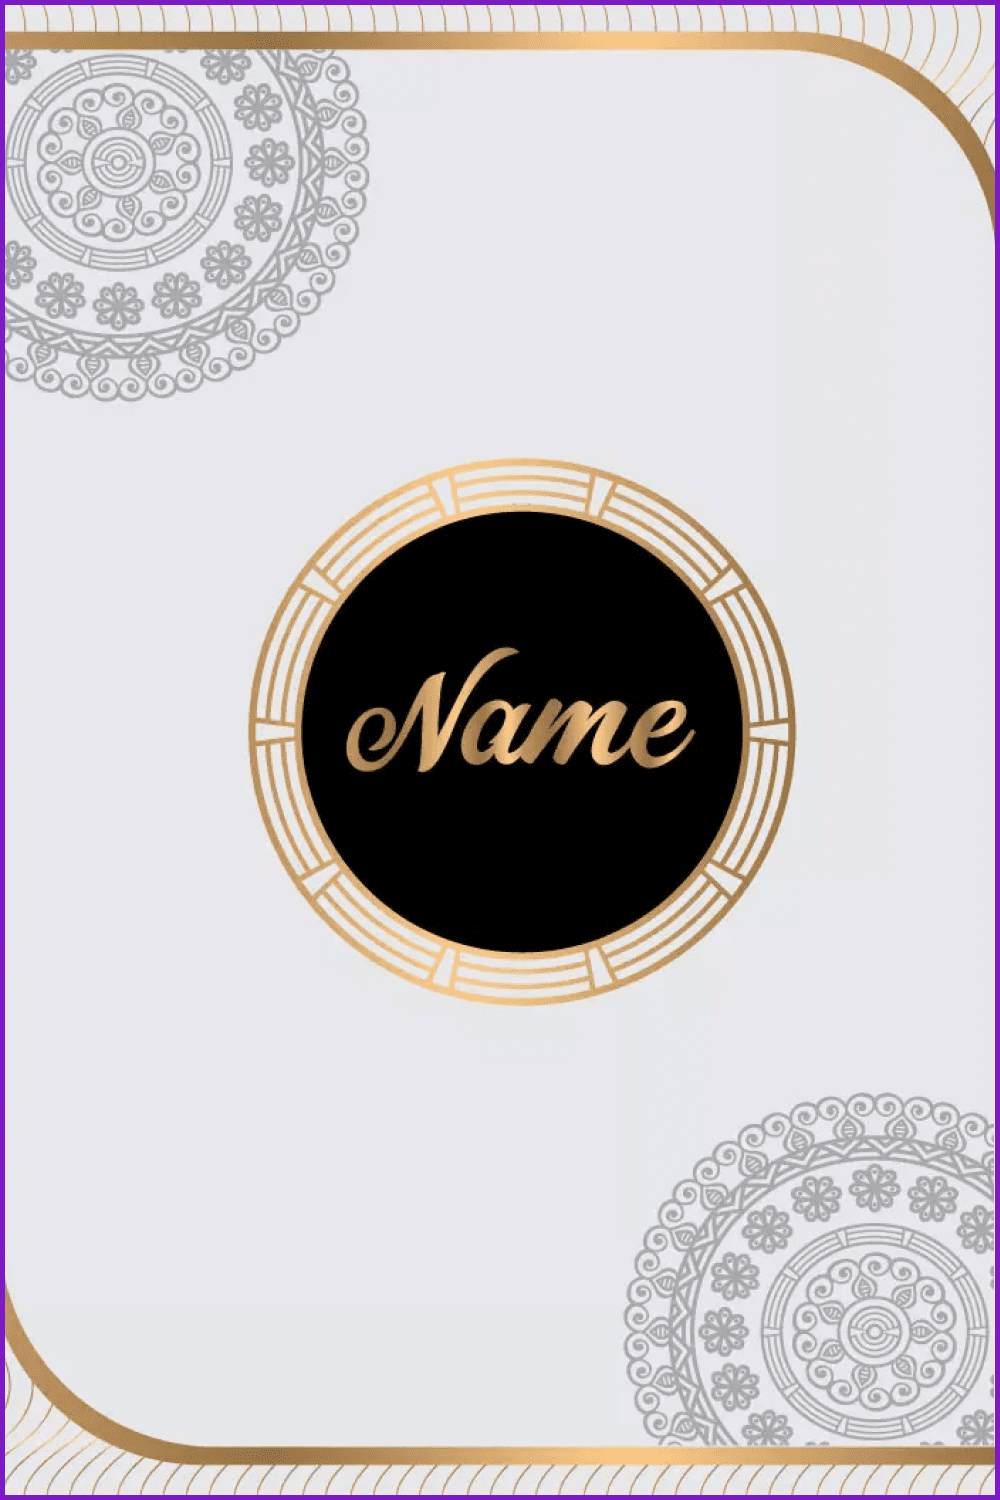 Greeting card with an ornament and a golden circle with a black background.